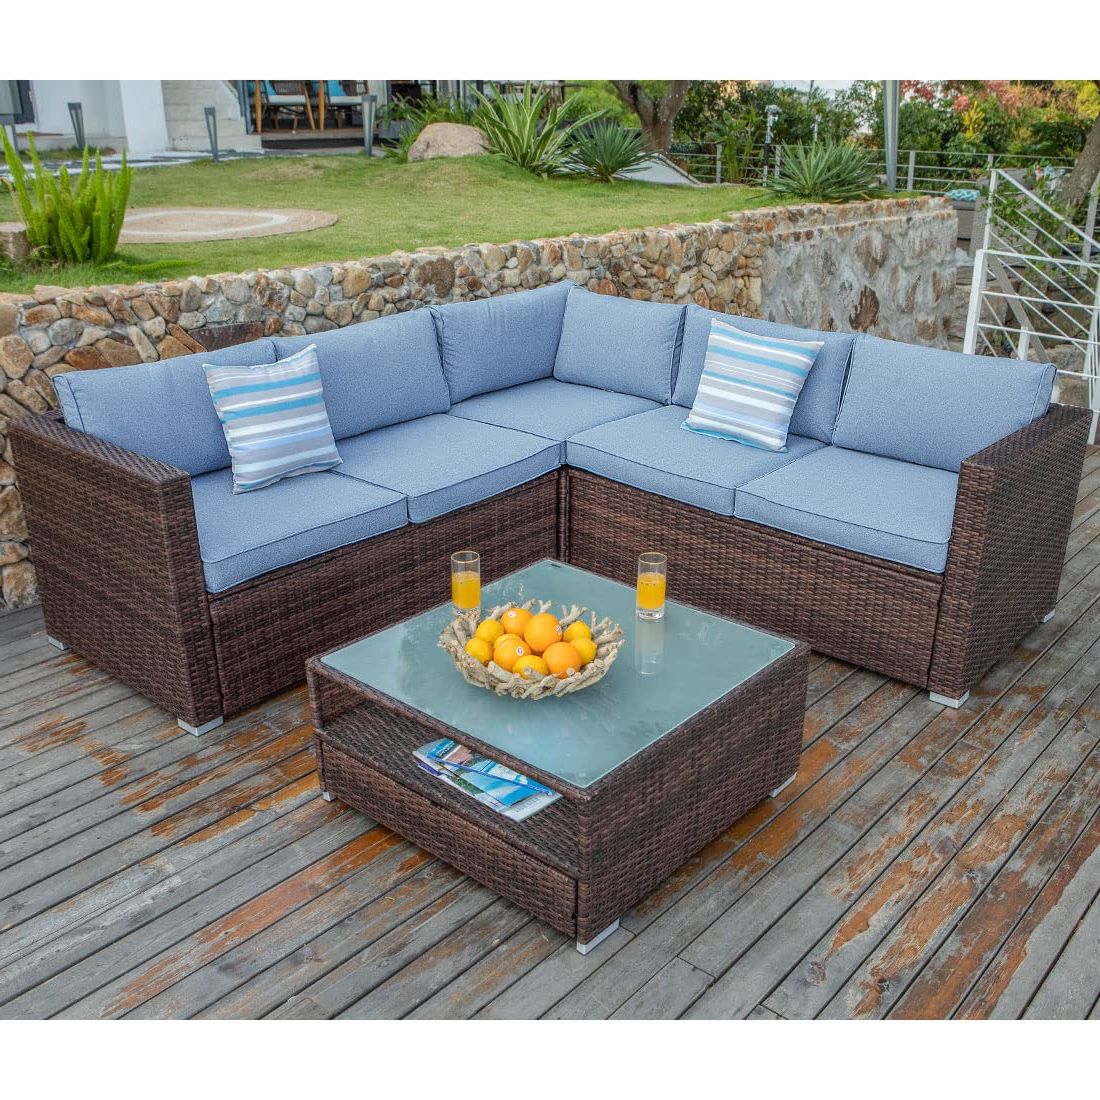 4 Piece Outdoor Wicker Seating Set In Brown Intended For Latest Amazon: Cosiest 4 Piece Outdoor Furniture Set All Weather Brown Wicker  Sectional Sofa W Glass Coffee Table, Heritage Blue Cushions,2 Stripe Woven  Pillows Incl (View 13 of 15)